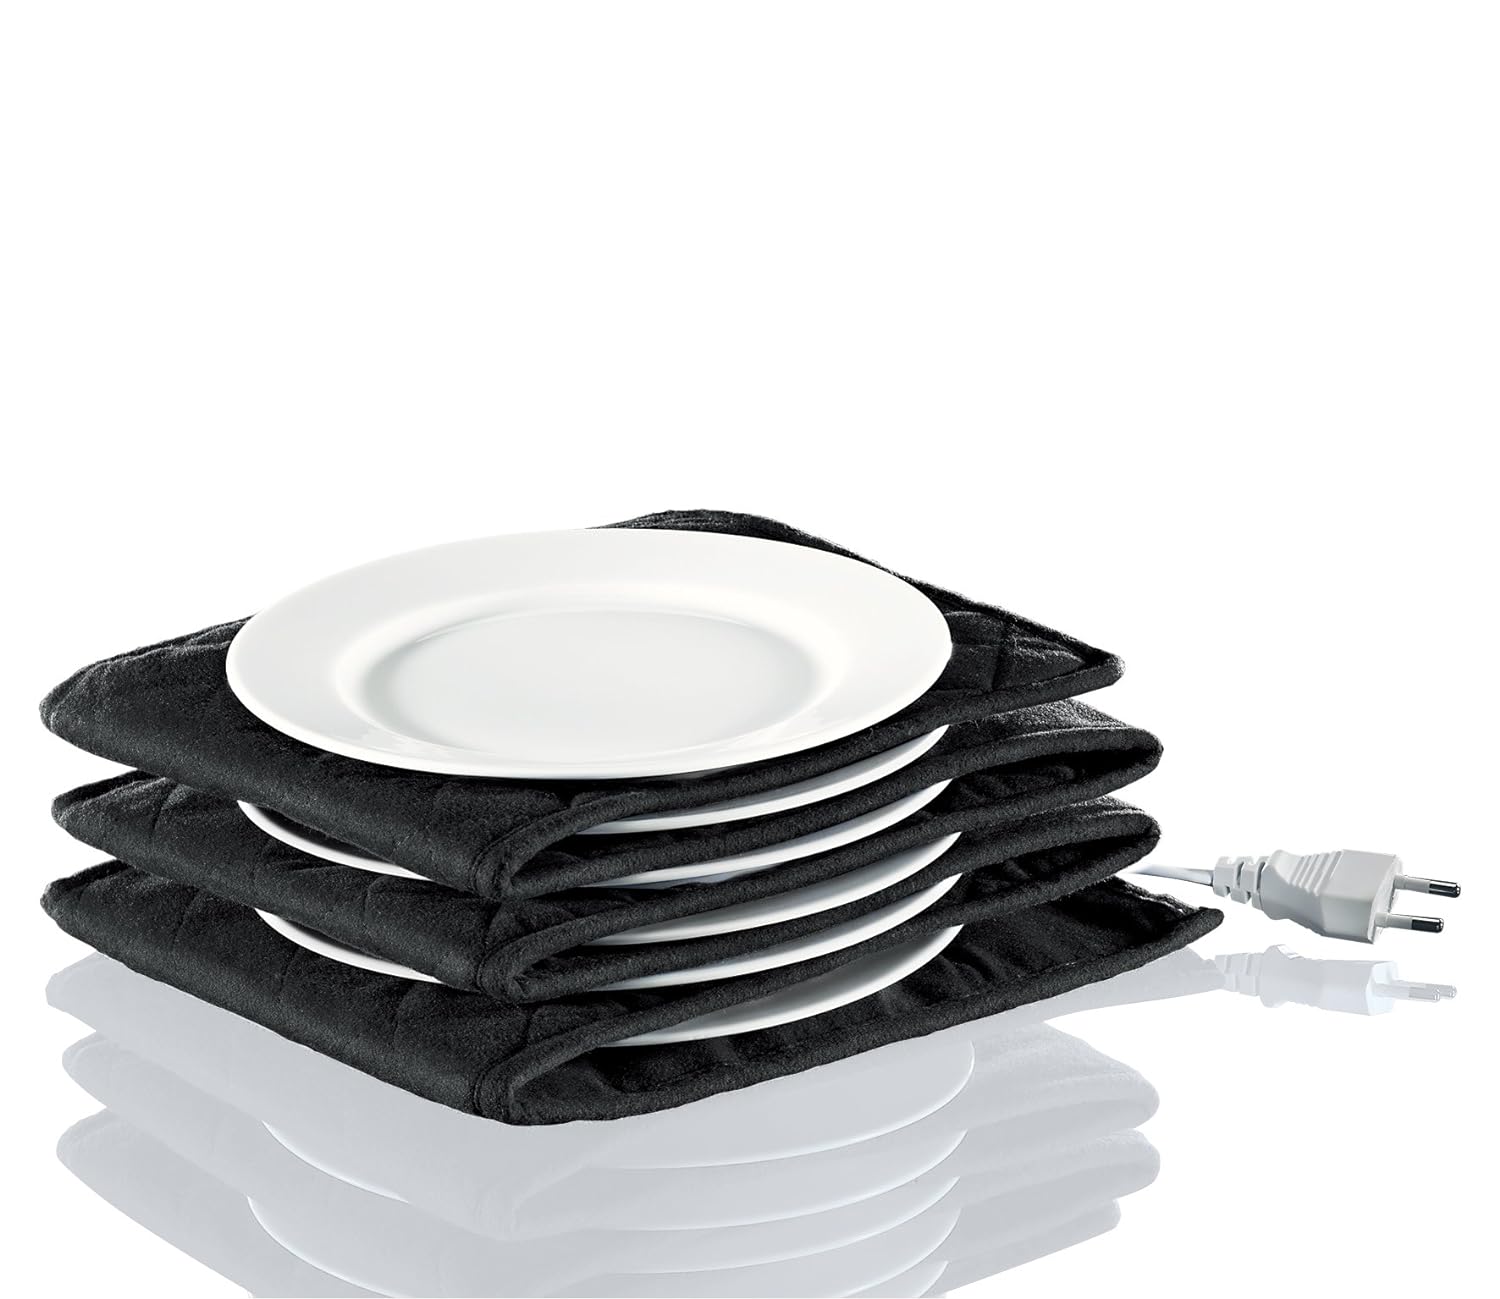 Küchenprofi Electric Plate Warmer, Suitable for up to 12 Dinner Plates, with Indicator Light, Removable Cover, Ceramic Plate